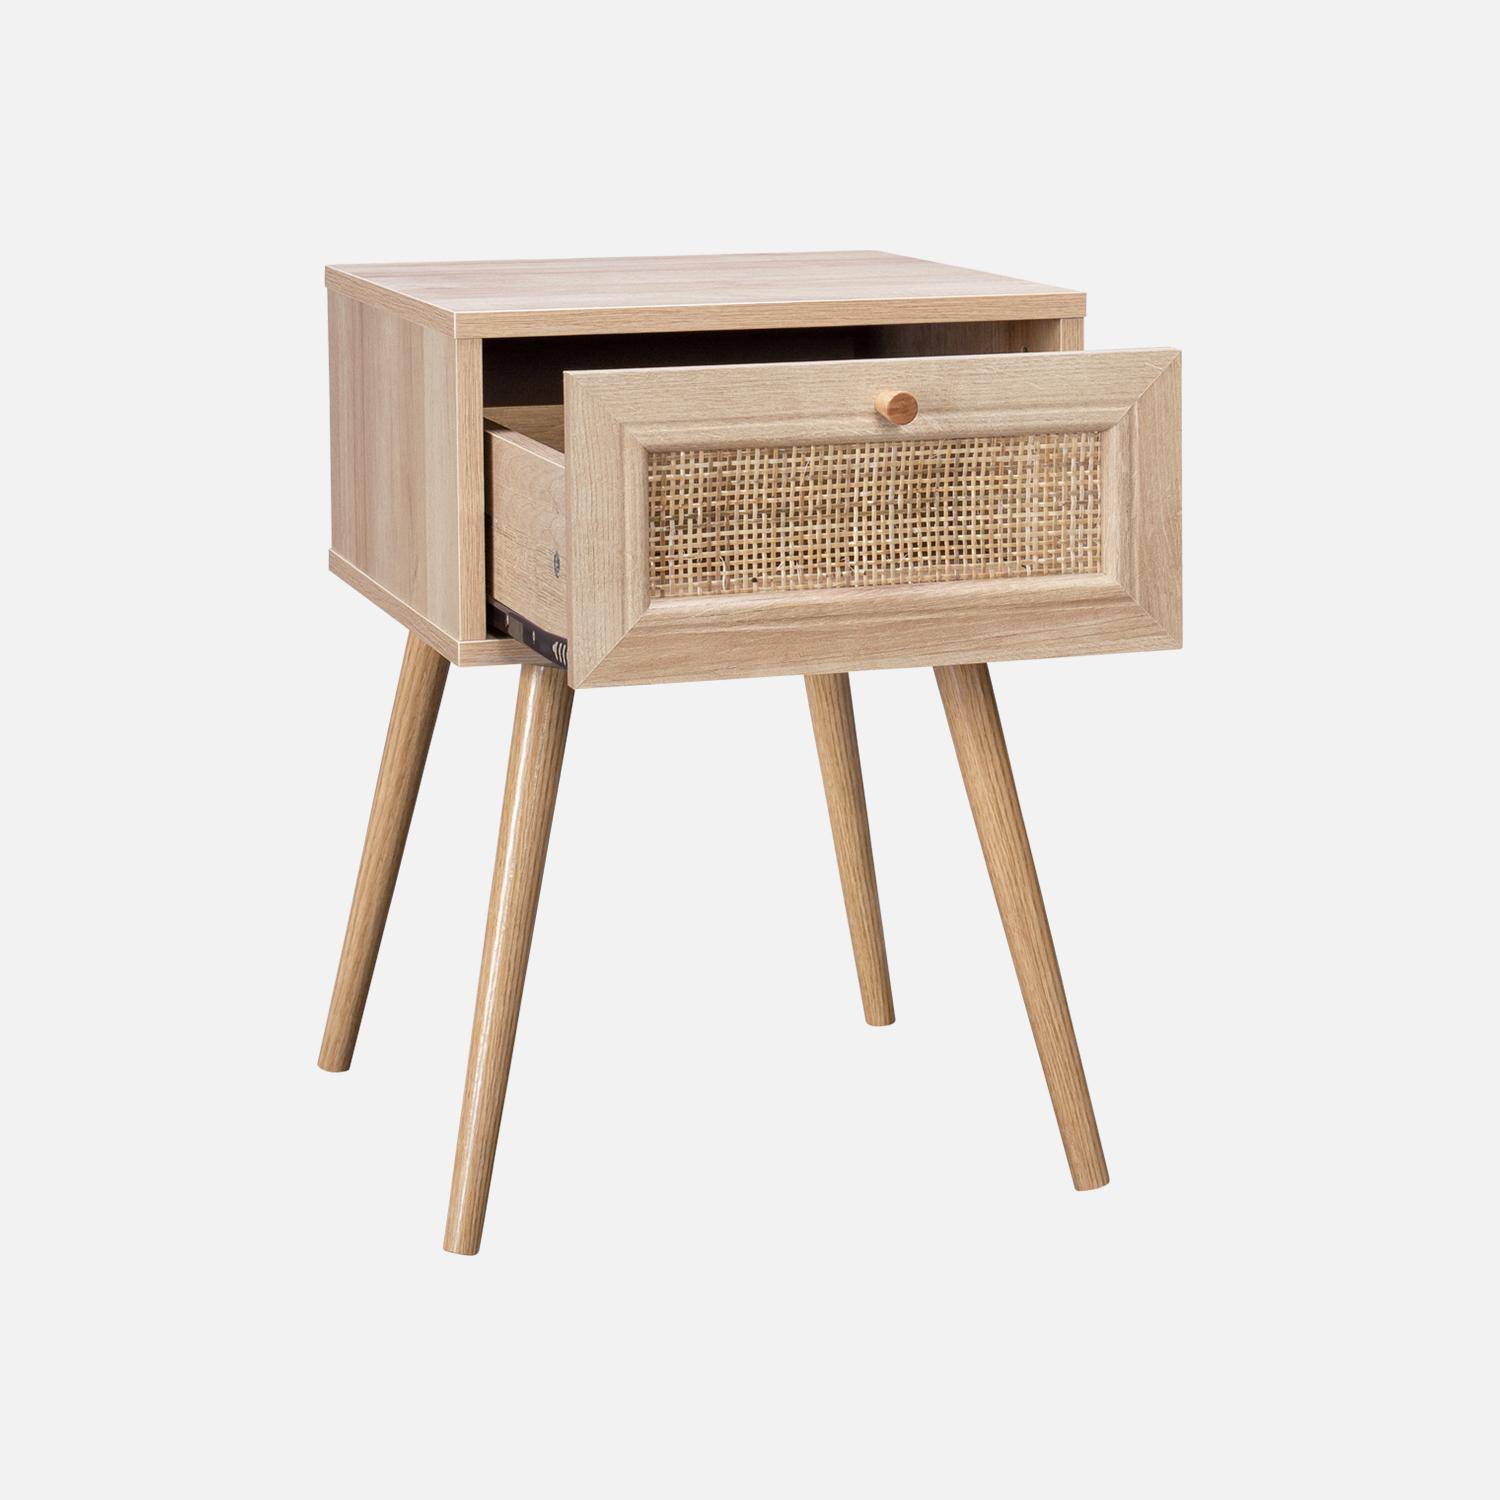 Woven rattan bedside table with drawer, 39x39x55.4cm - Boheme - Natural Wood colour Photo5